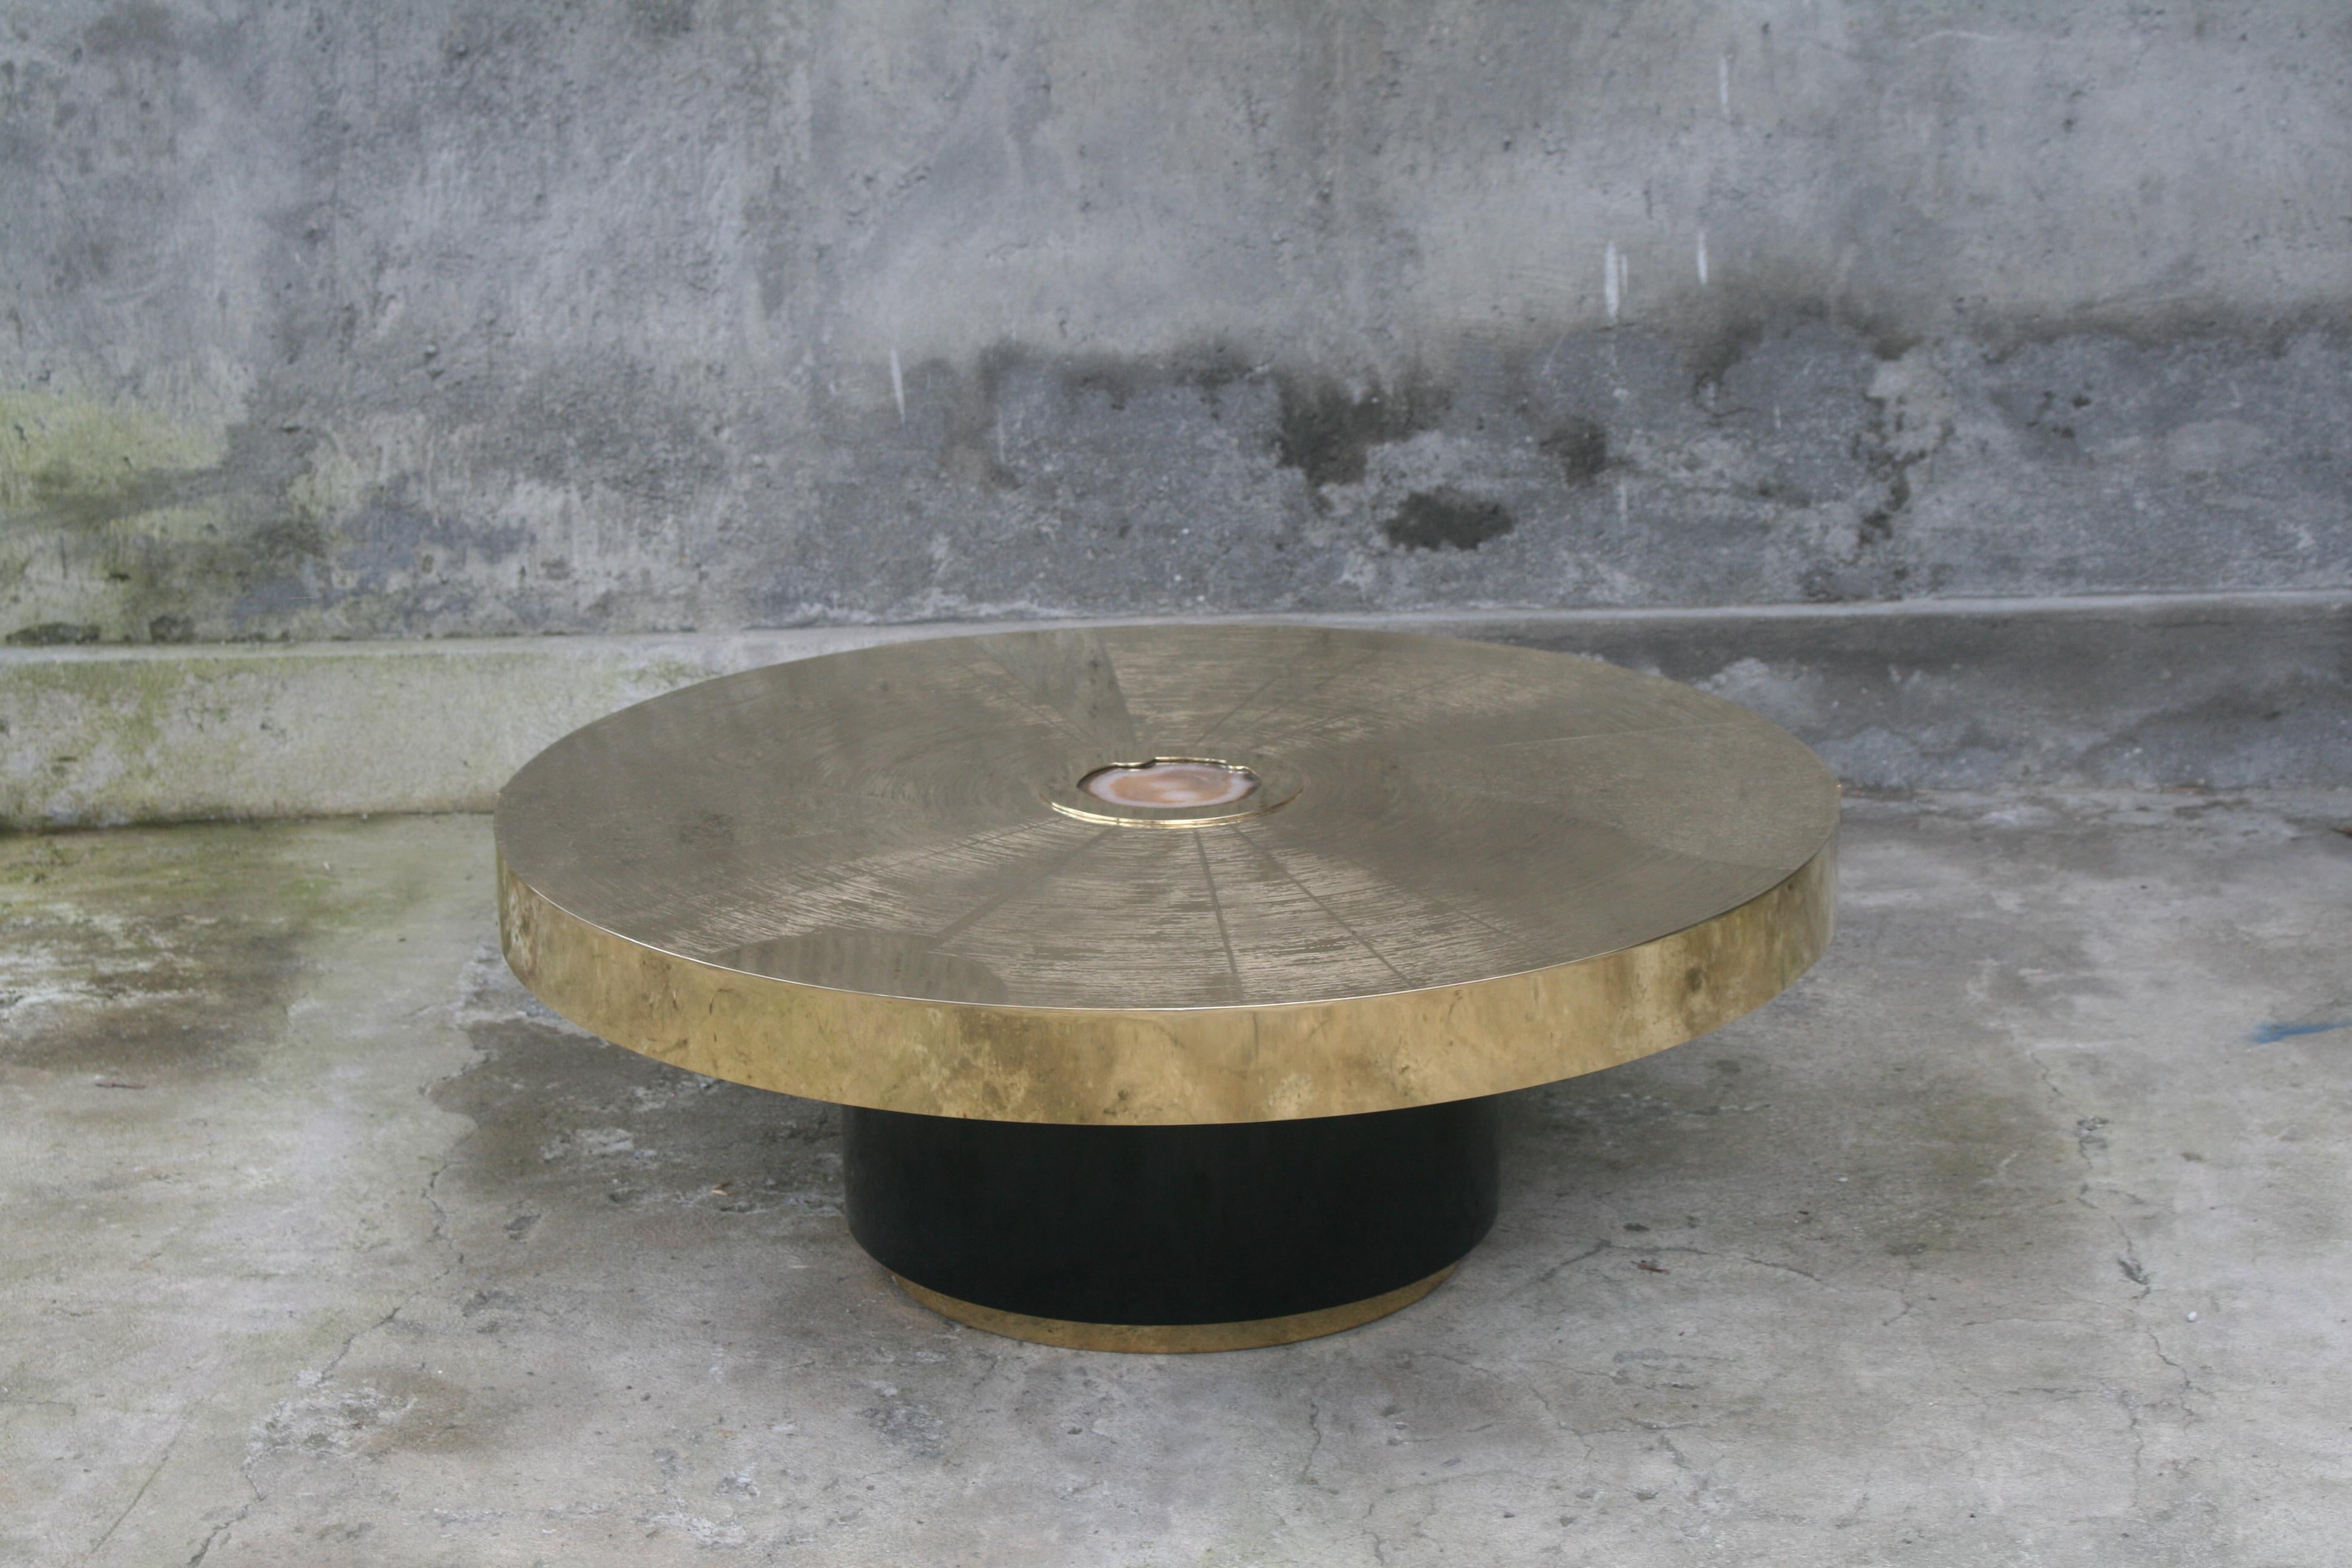 Studio Belgali is a Belgian producer of brass handmade furniture. Mostly acid etched design, finished with high quality rare semi precious gems. 

Round Star Trek coffee table with agate stone slice inlay. It has been acid etched and black